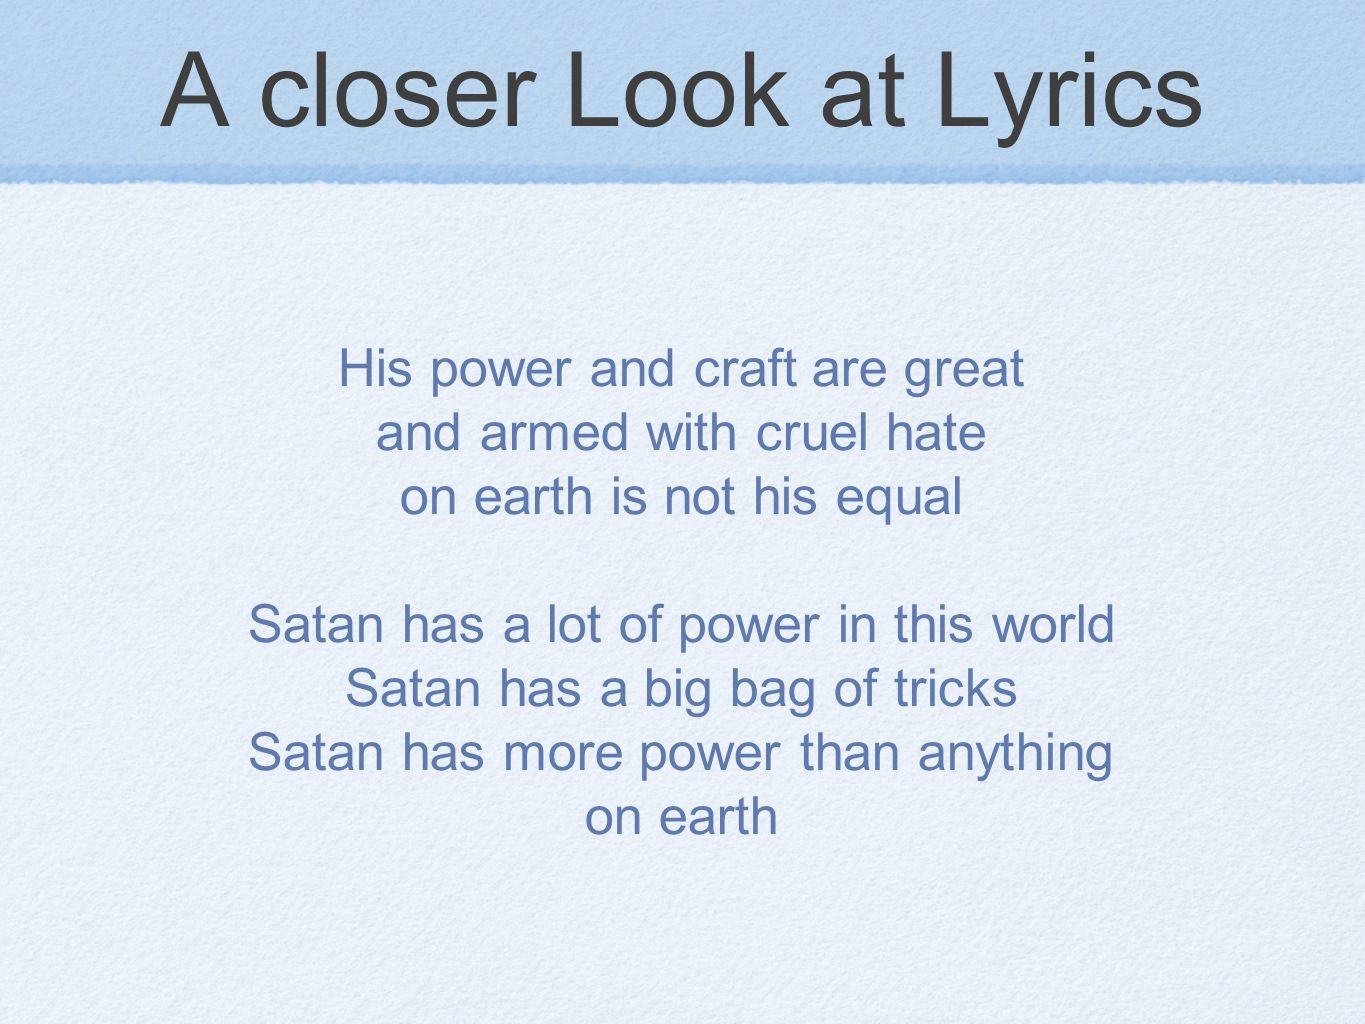 A closer Look at Lyrics His power and craft are great and armed with cruel hate on earth is not his equal Satan has a lot of power in this world Satan has a big bag of tricks Satan has more power than anything on earth